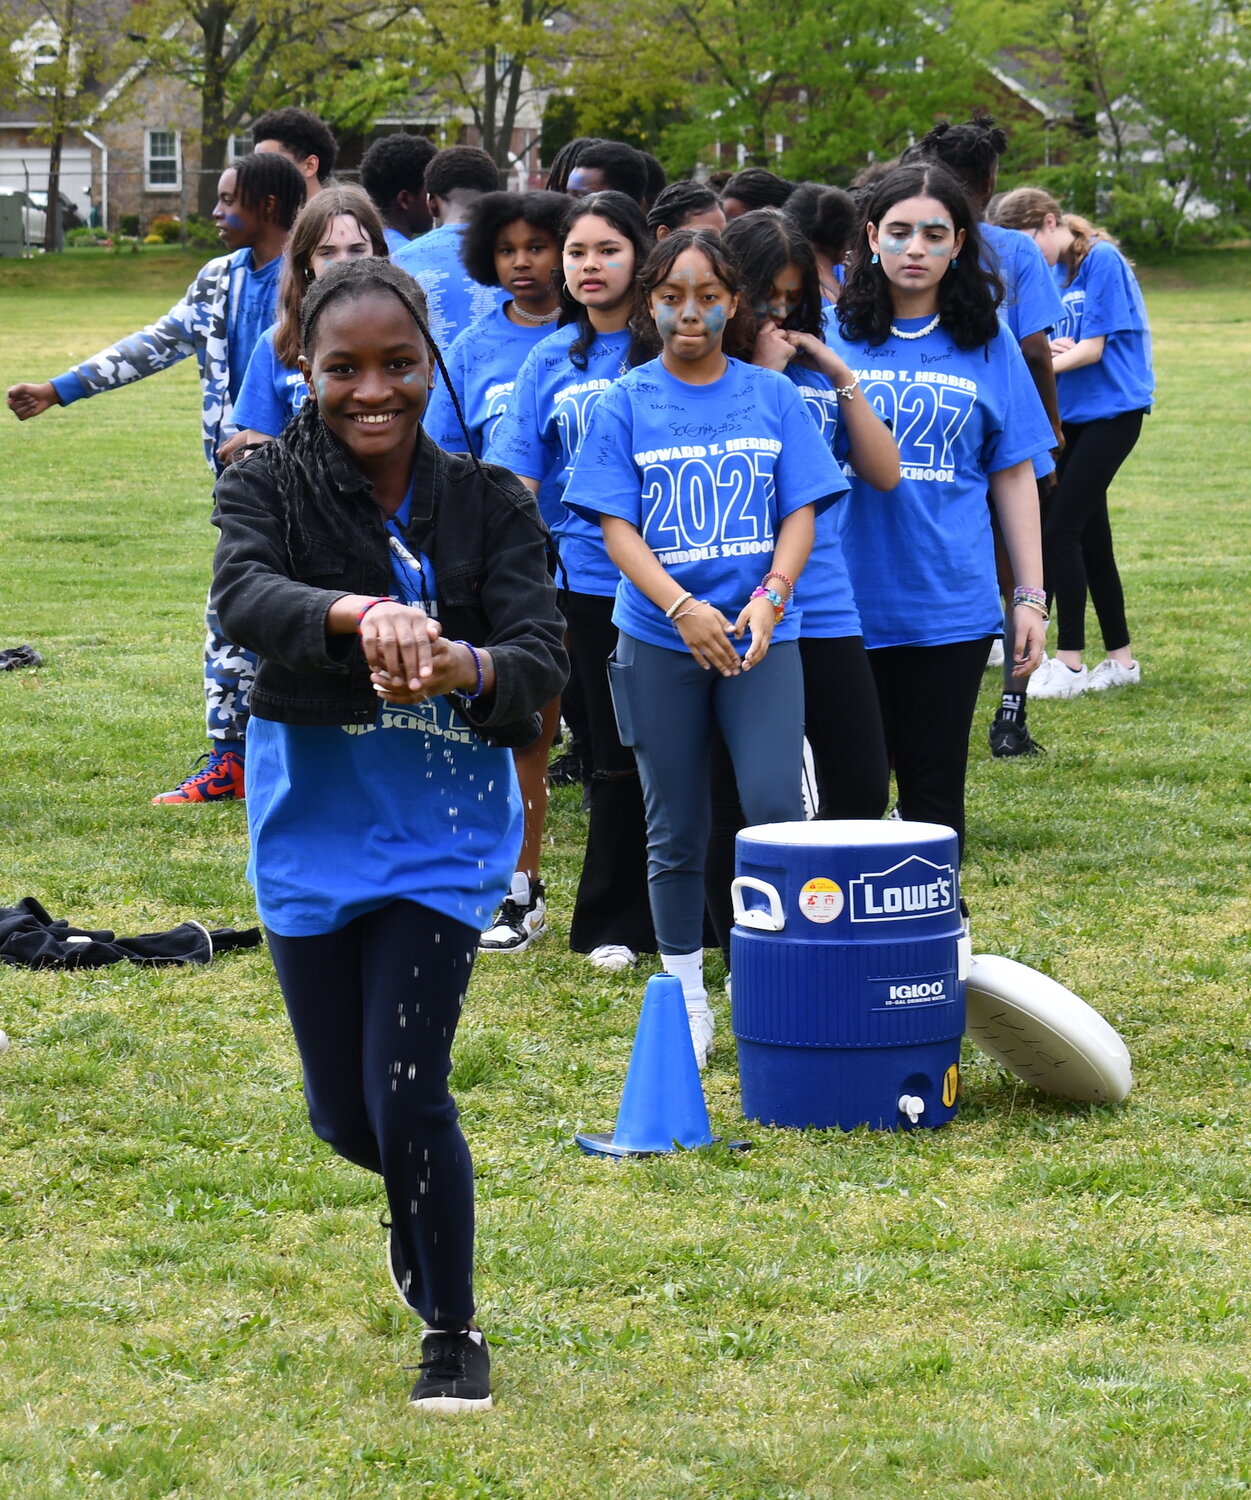 The eighth grade water bucket relay team sprints to the finish line during one of the final challenges.